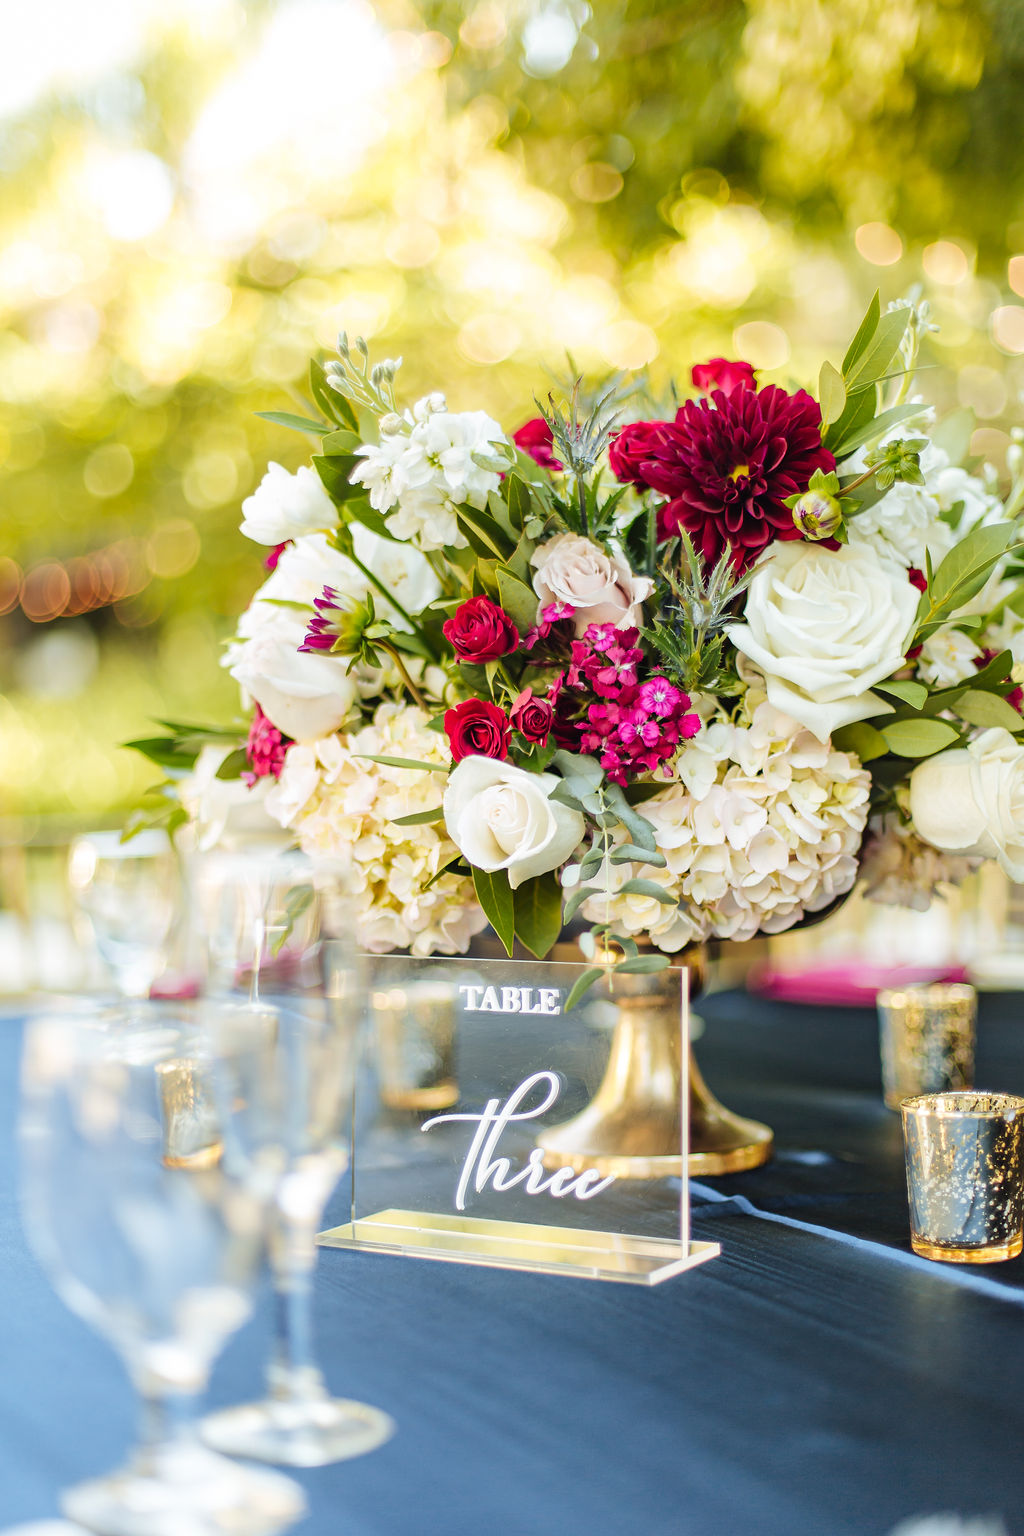 acrylic table number next to white and maroon floral arrangement in gold vase